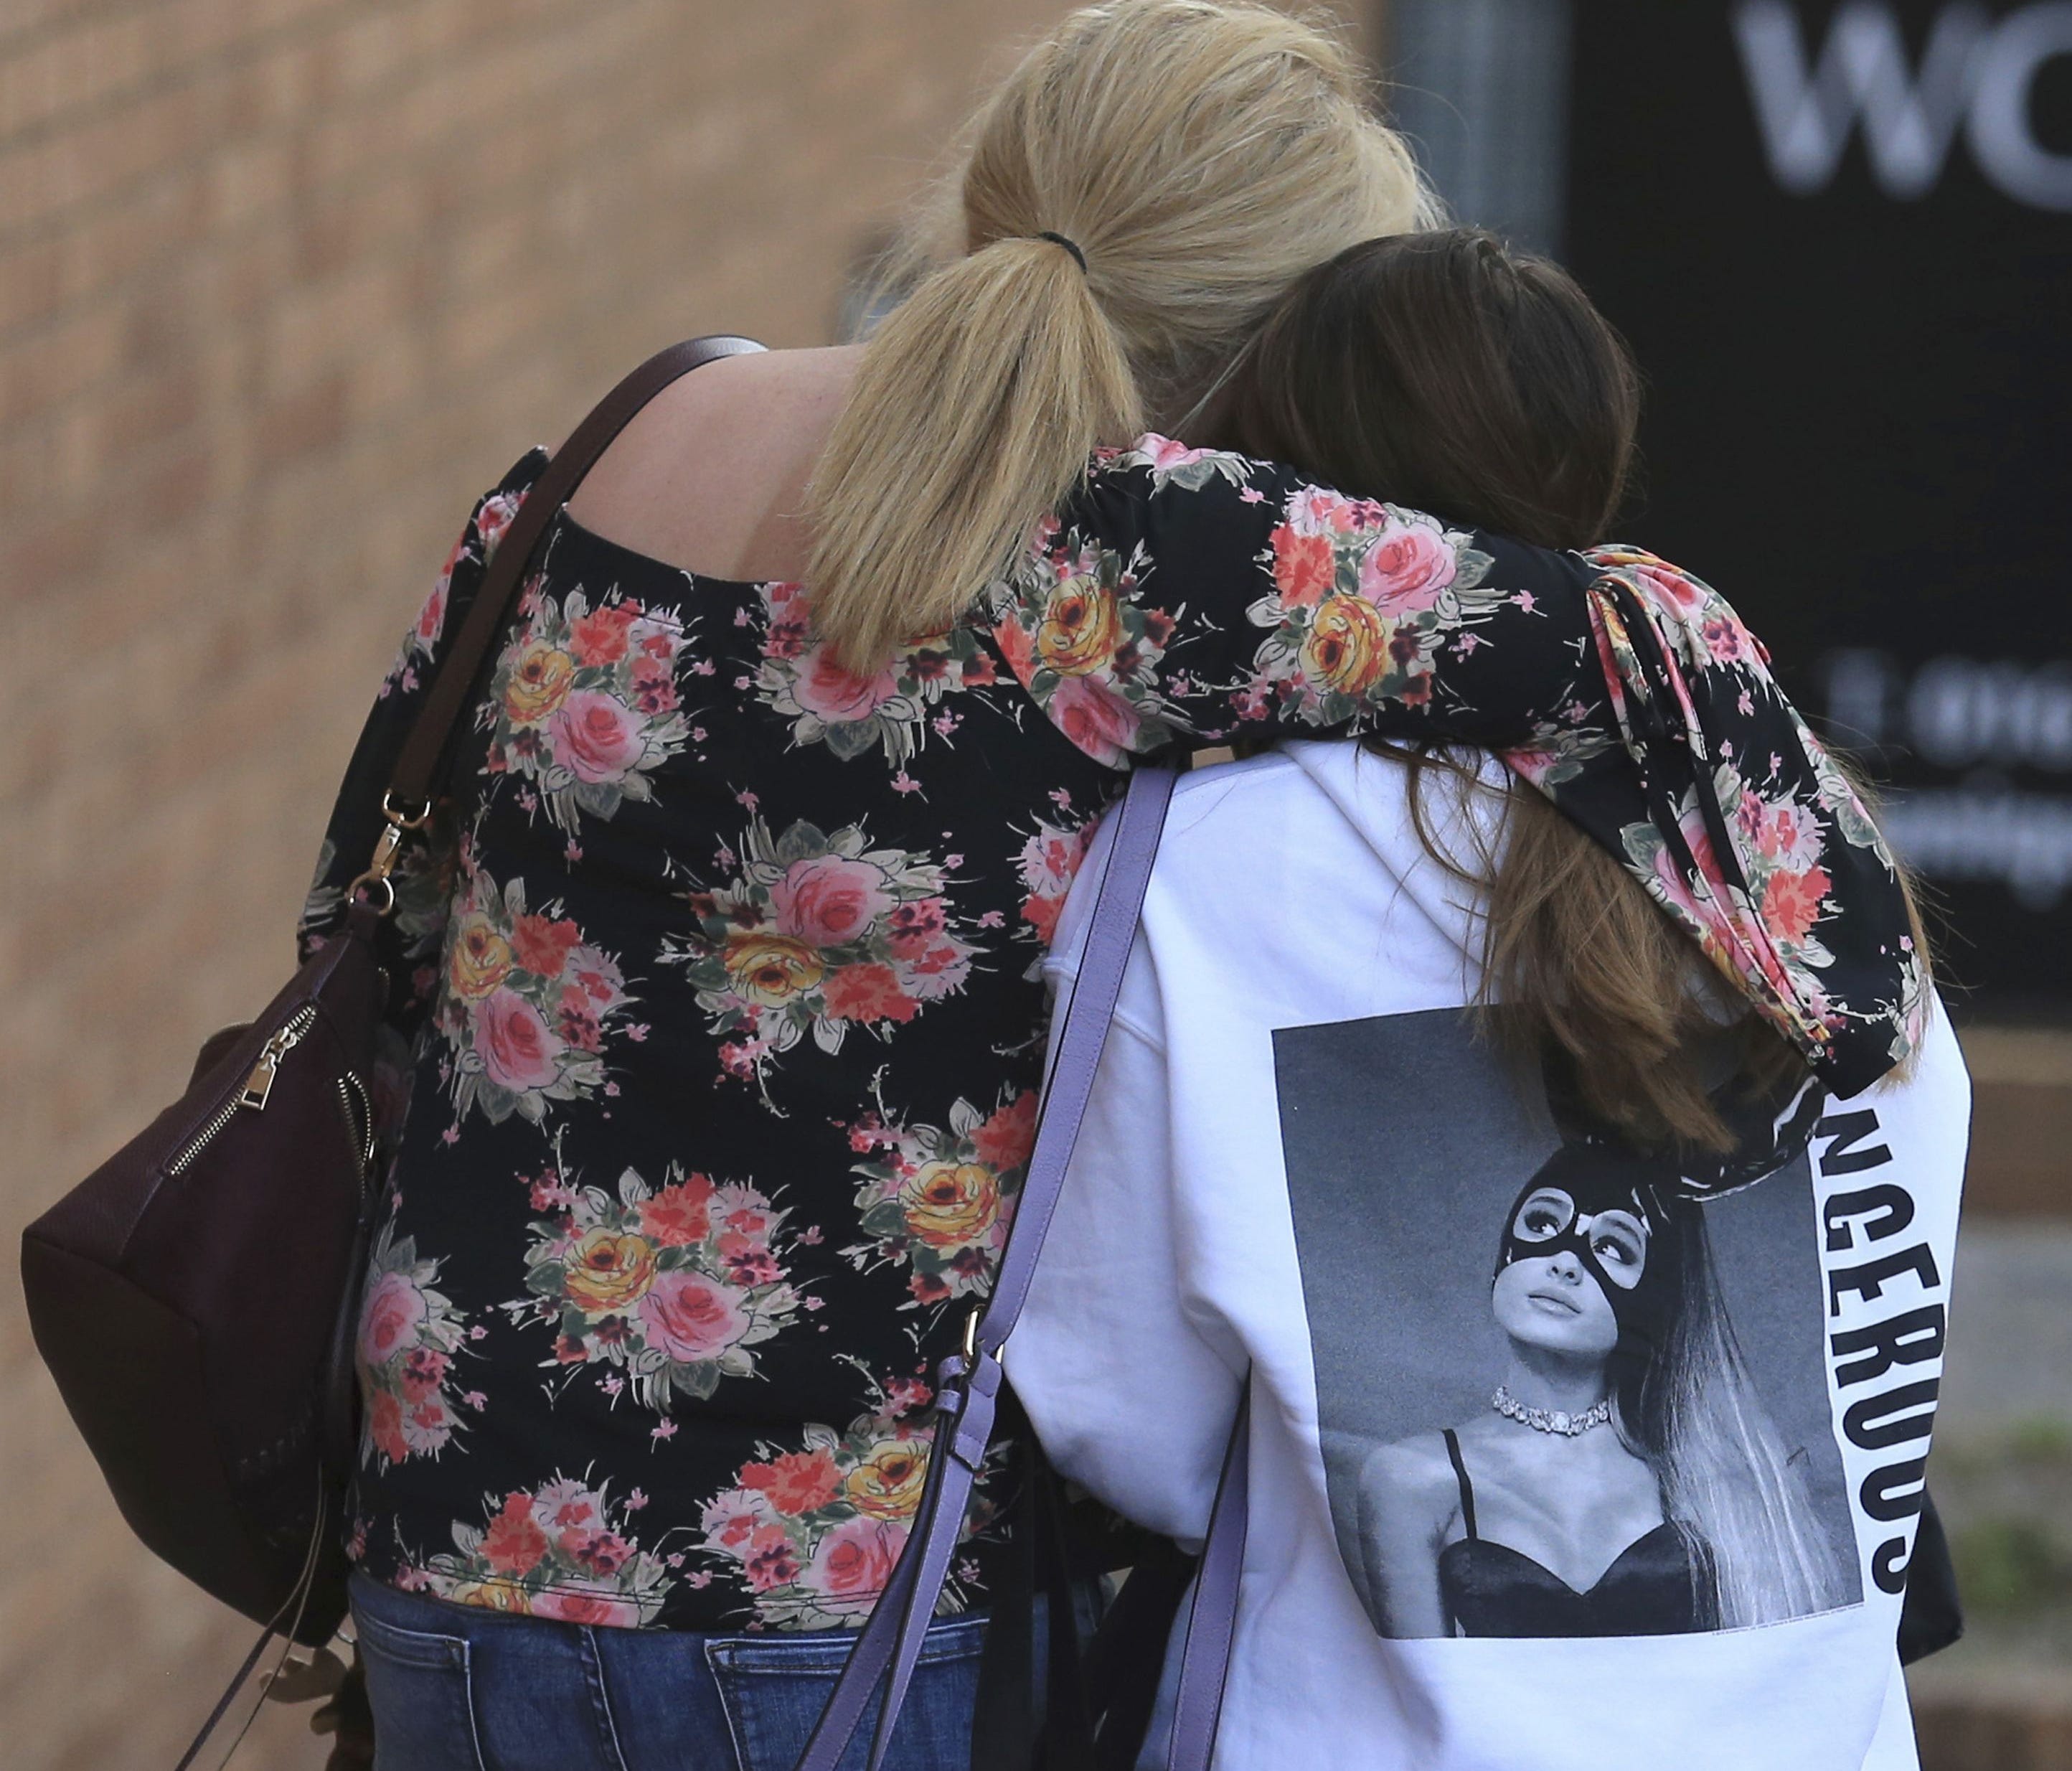 A fan is comforted as she leaves the Park Inn hotel in central Manchester, England May 23.  At least 22 people were killed in an explosion following a Ariana Grande concert at the Manchester Arena late Monday evening. Following the attacks, some on s